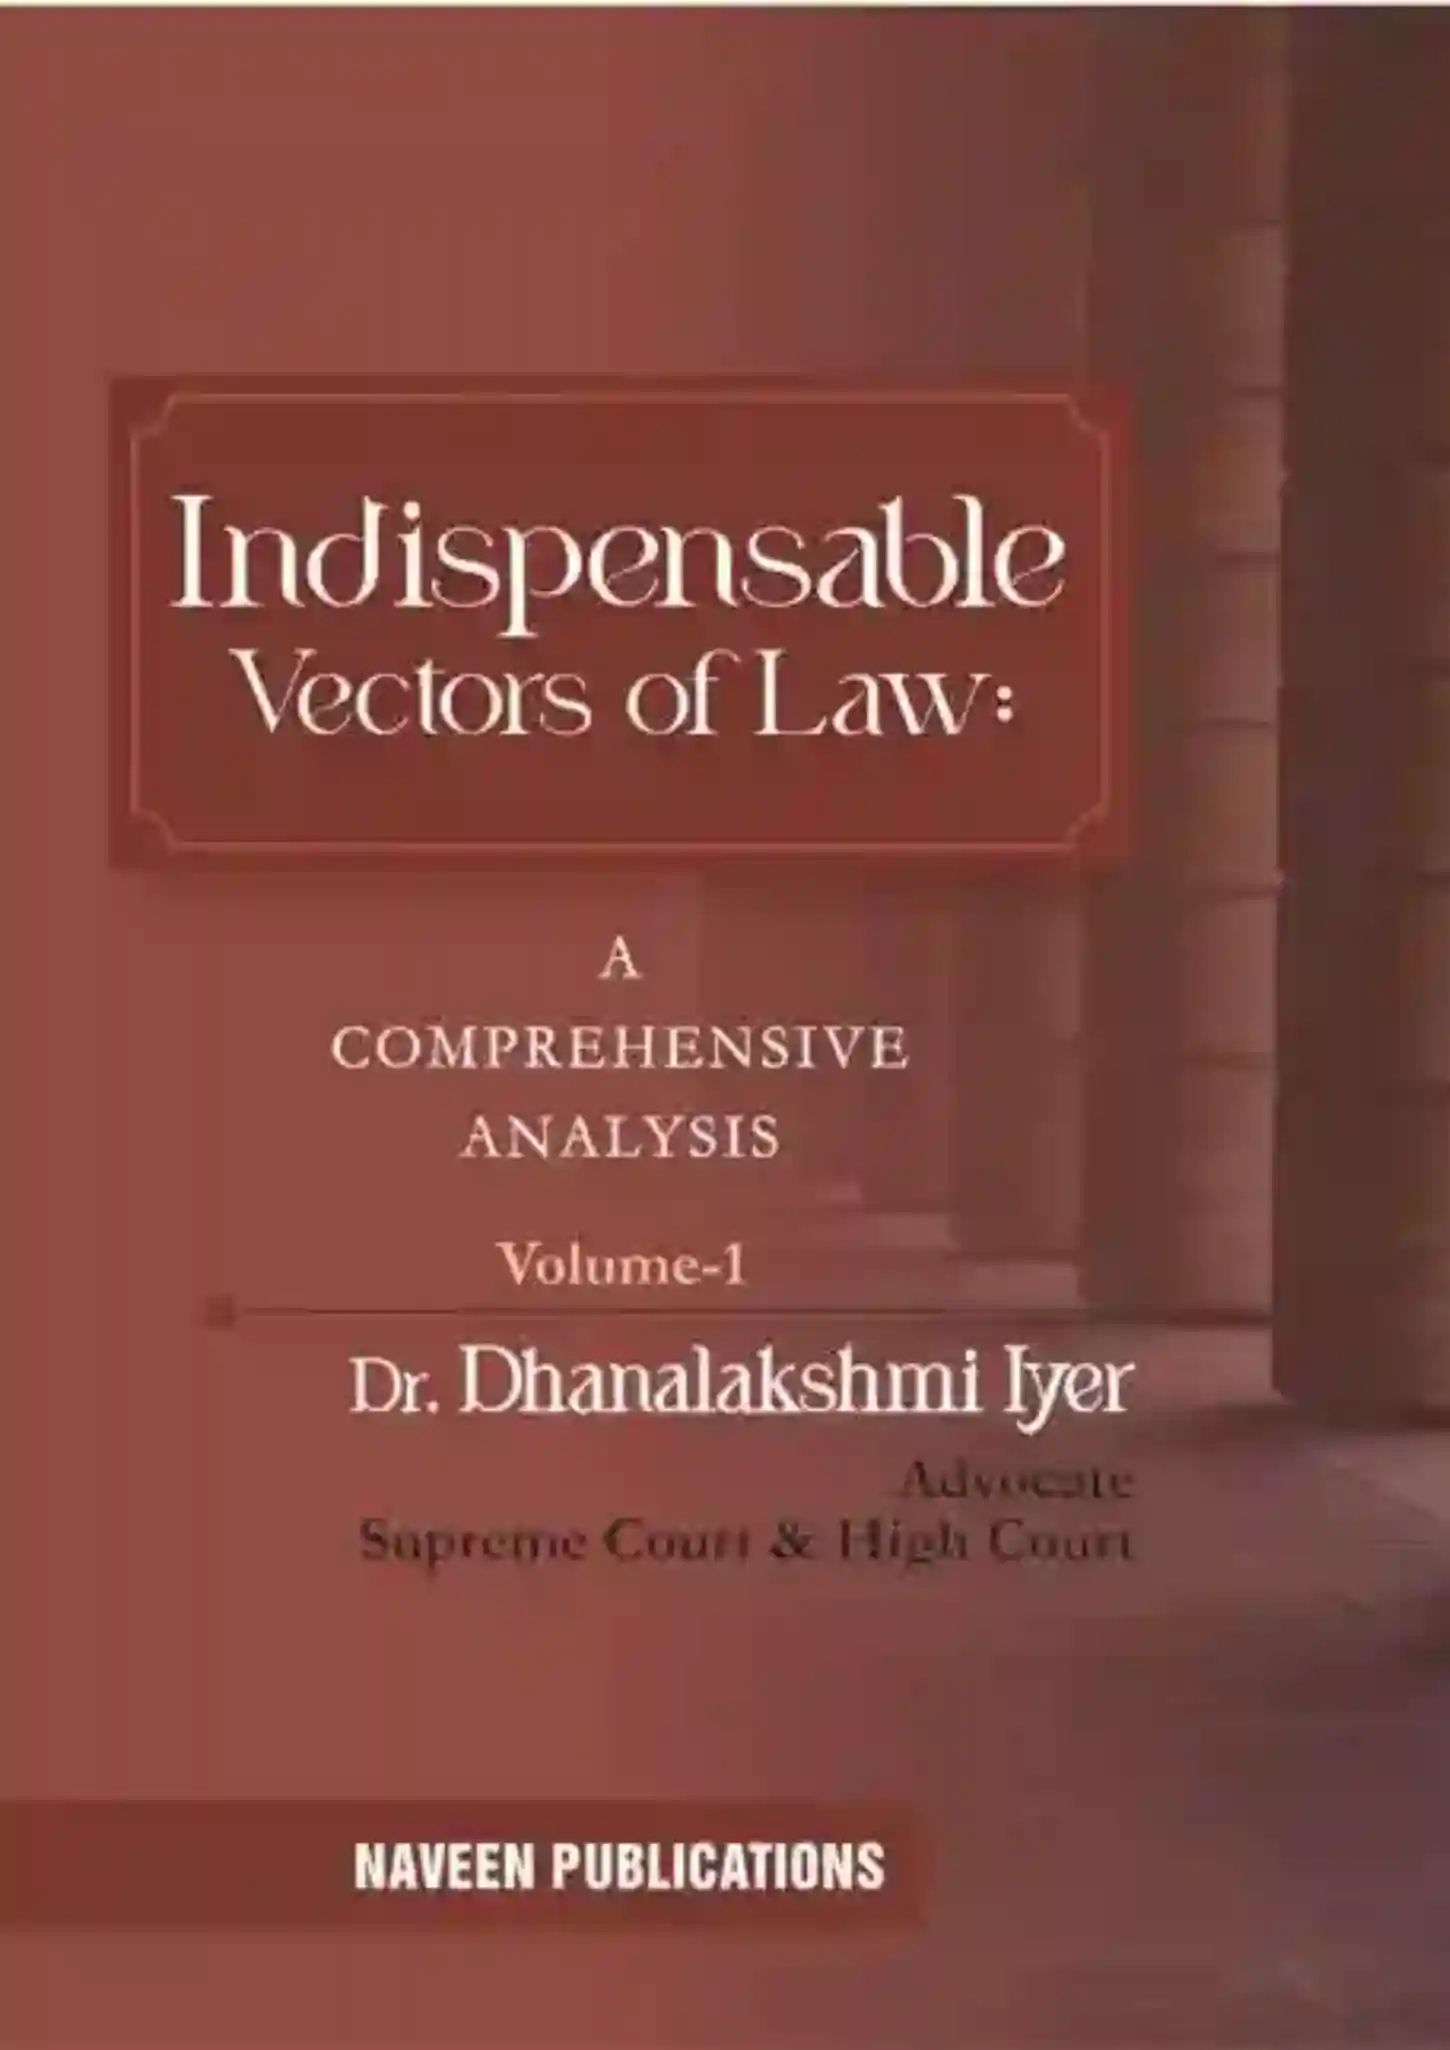 Indispensable Vectors of Law